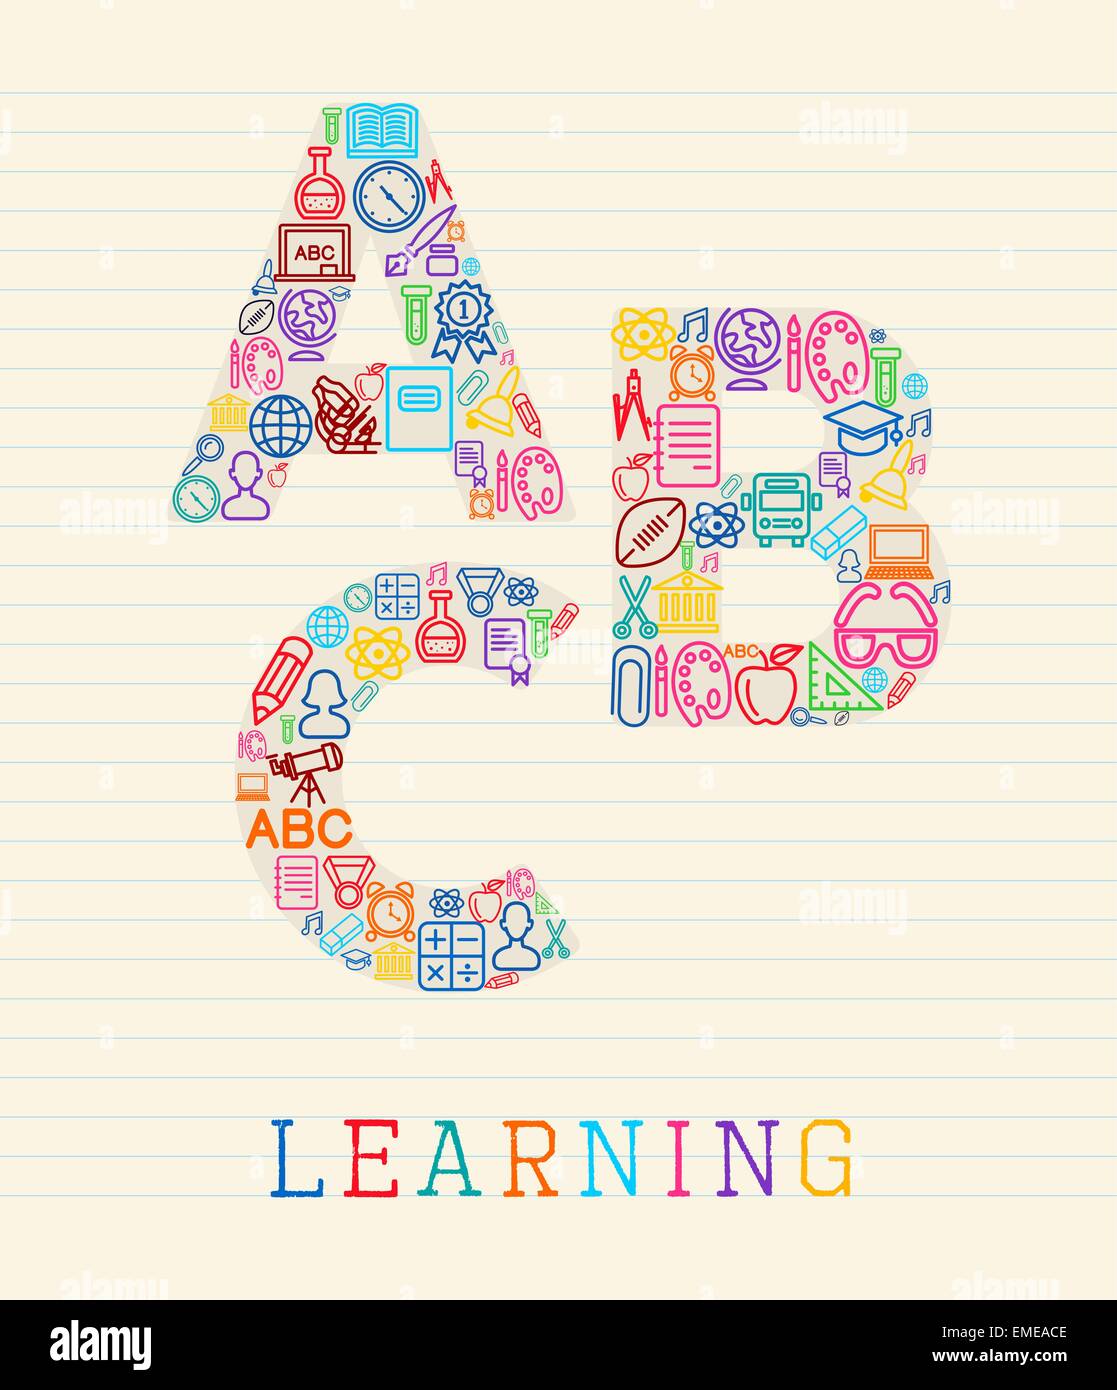 Learning concept illustration Stock Vector